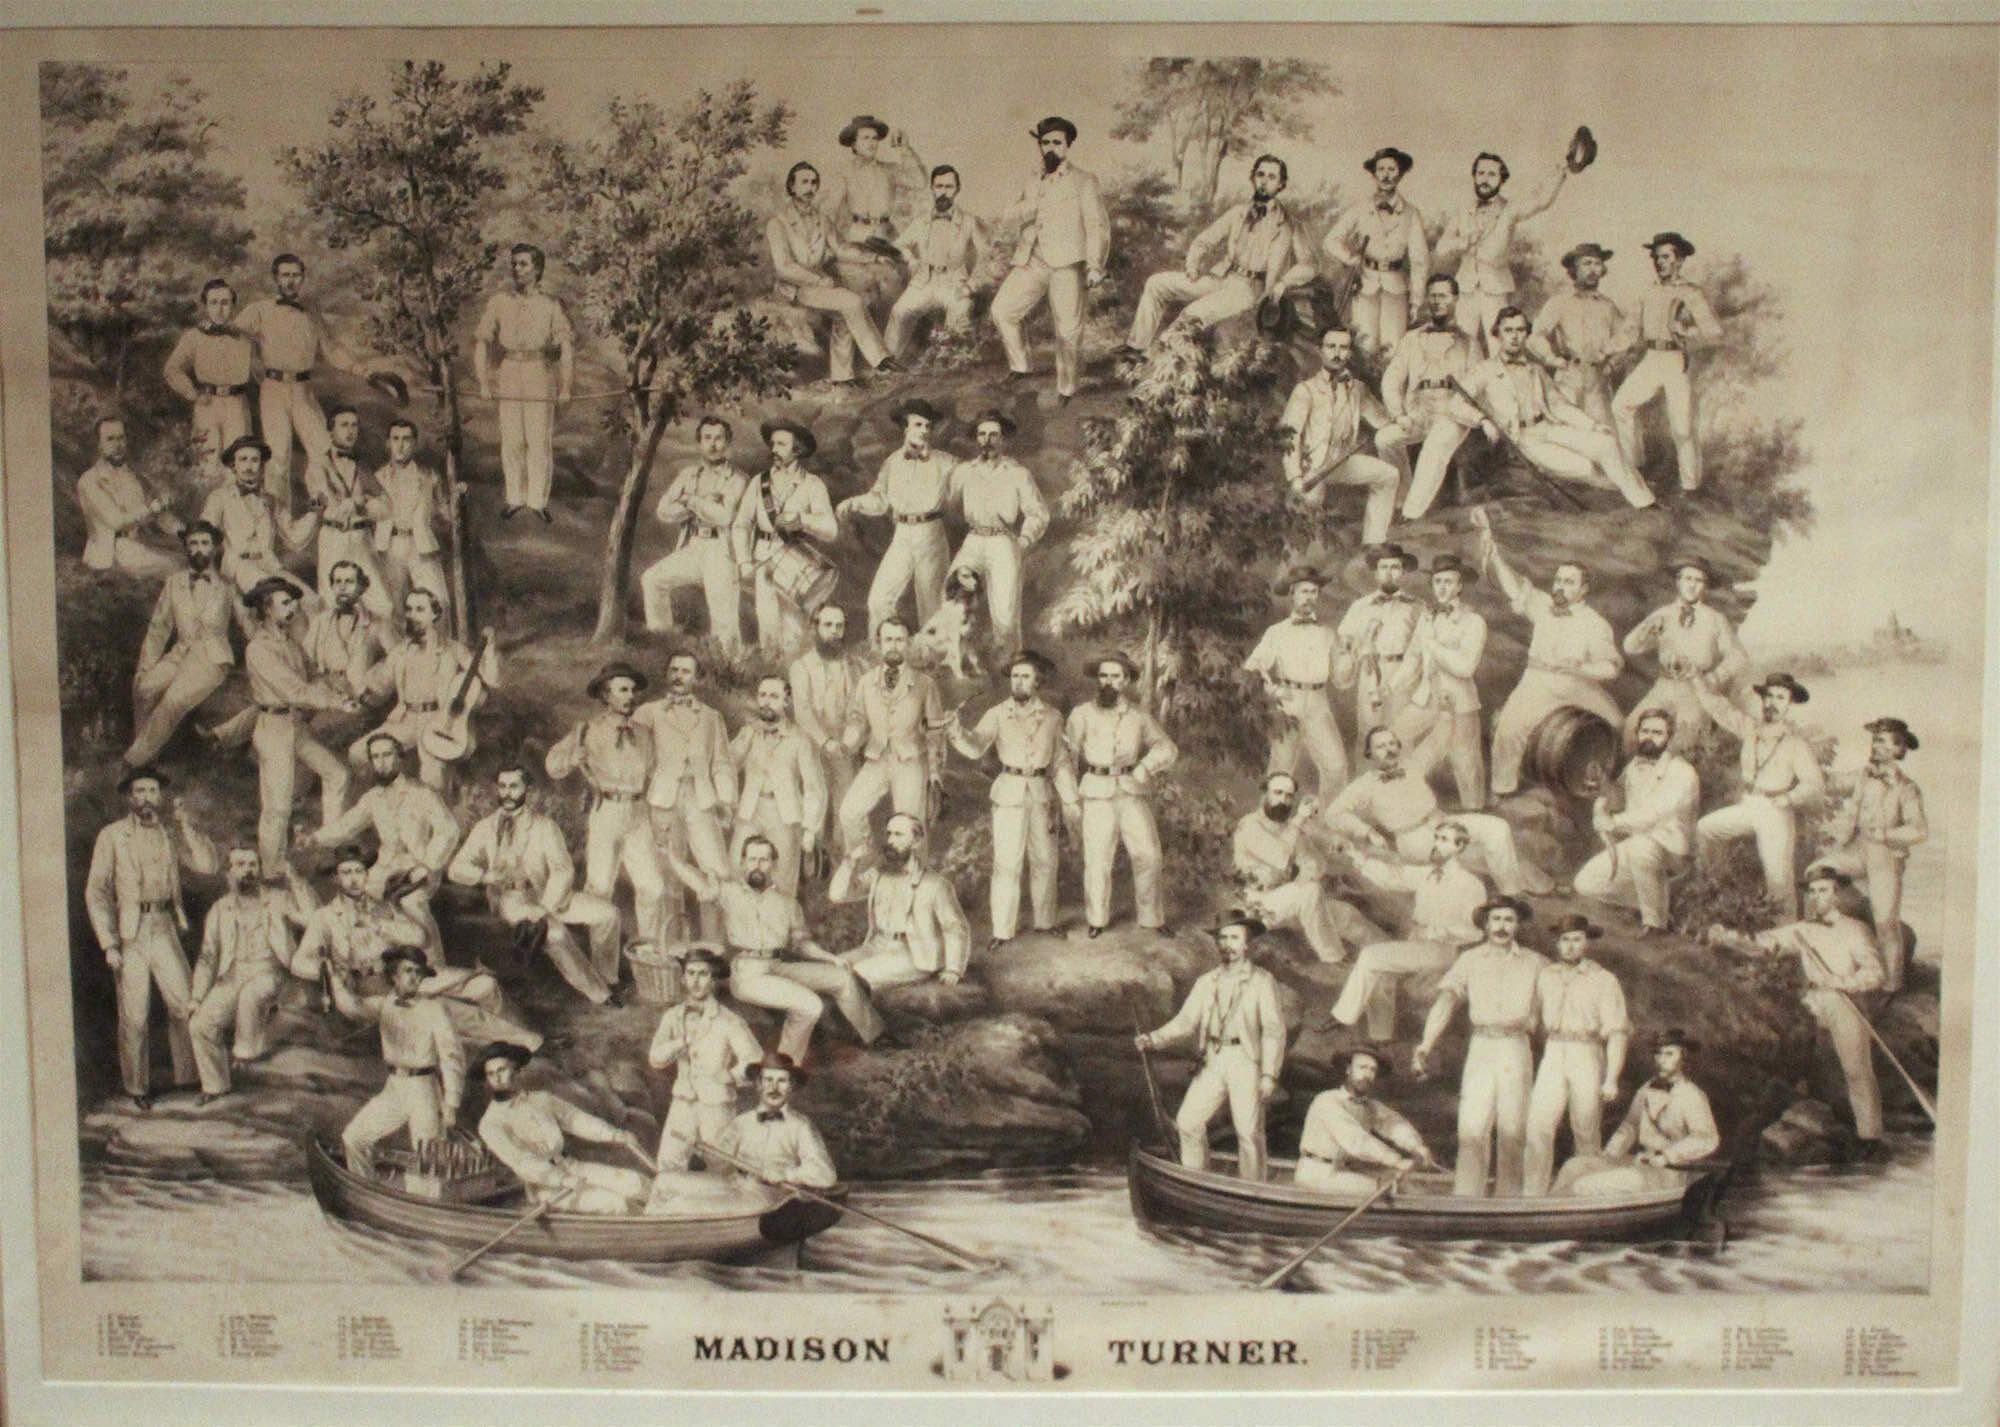  This large lithograph fancifully depicts the Madison Turners and some favorite pursuits: drinking, music, shooting, boating, and gymnastics. Published by Louis Kurz of Milwaukee, it &nbsp;shows John George Ott just above the boat to the lower left. 